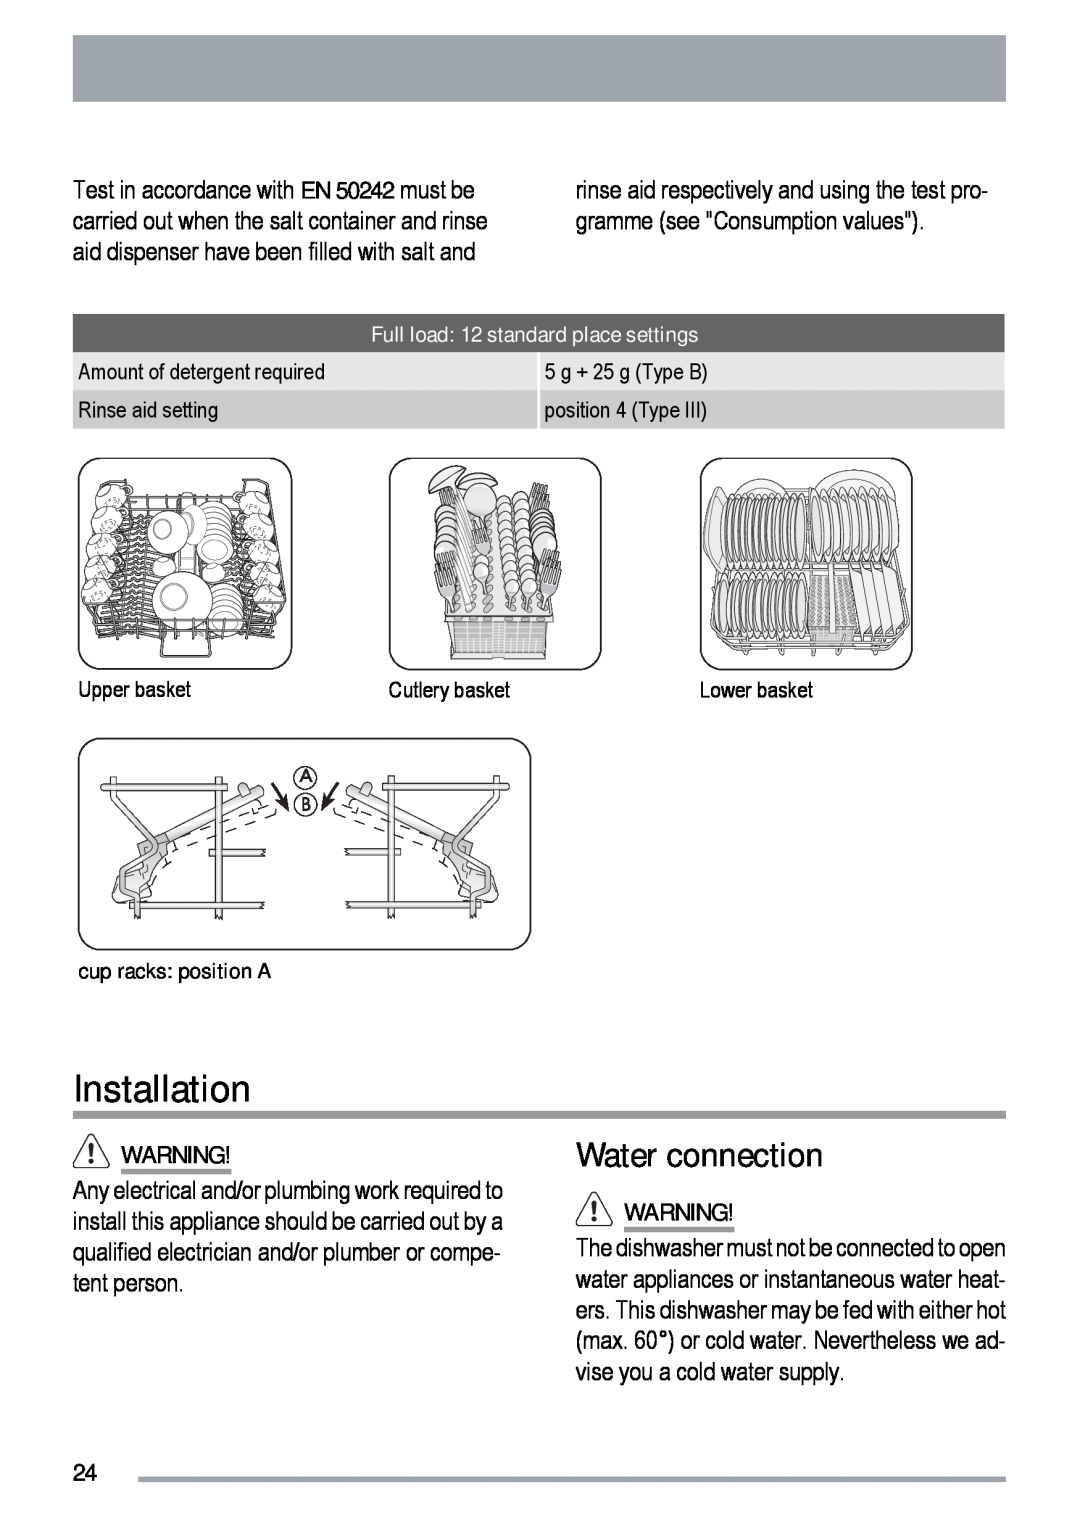 Zanussi ZDF 312 user manual Installation, Water connection, Full load 12 standard place settings, cup racks position A 